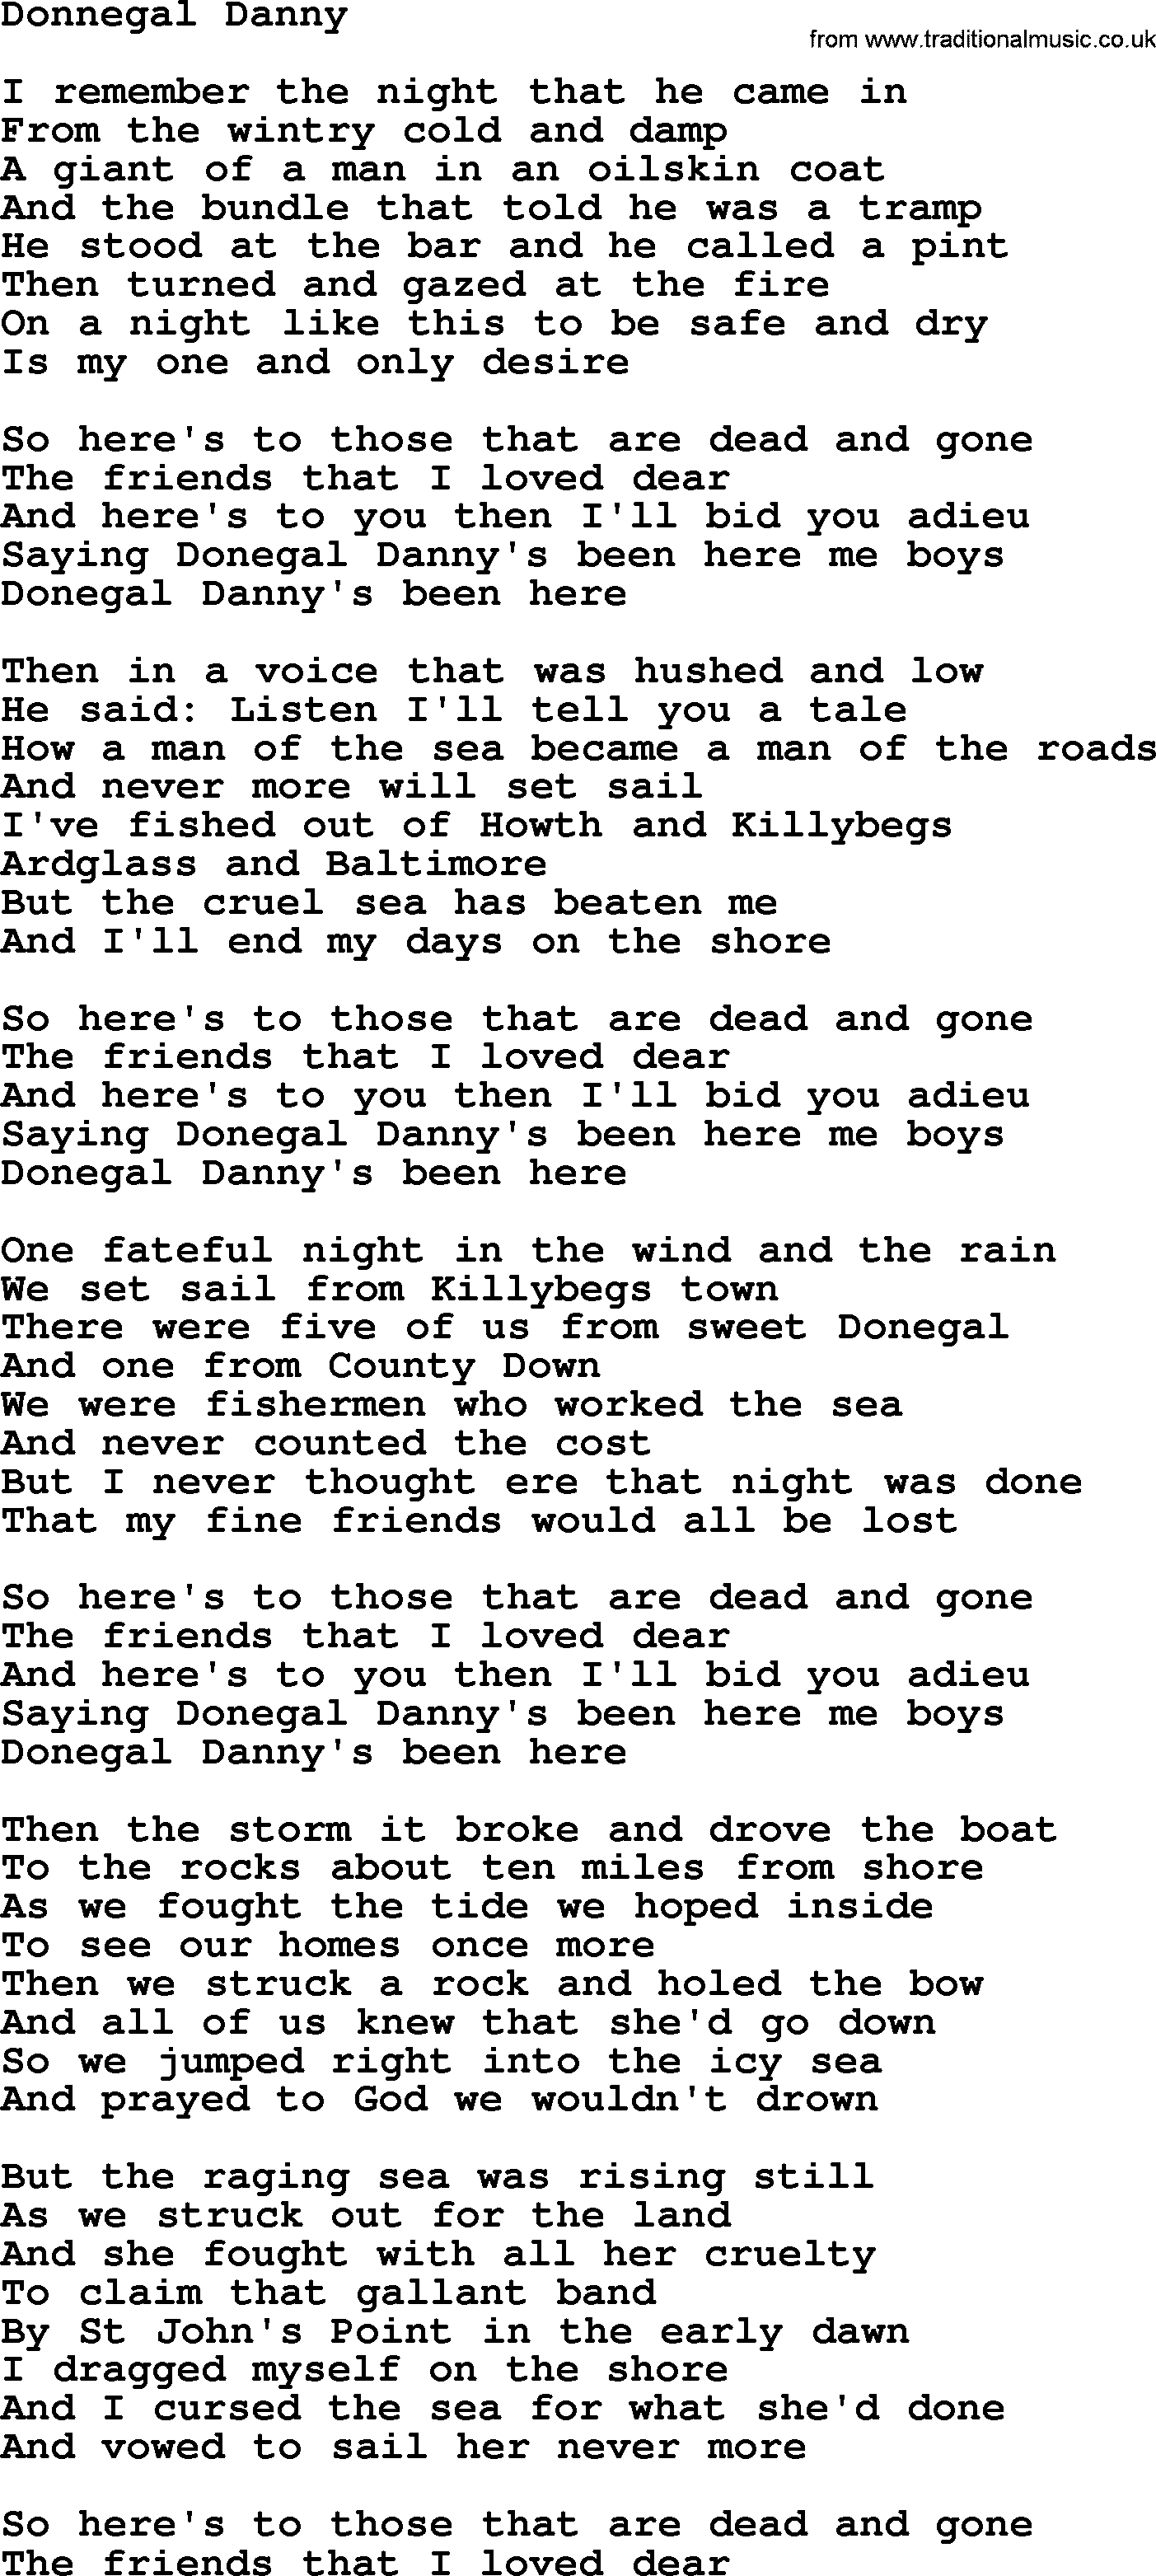 The Dubliners song: Donnegal Danny, lyrics